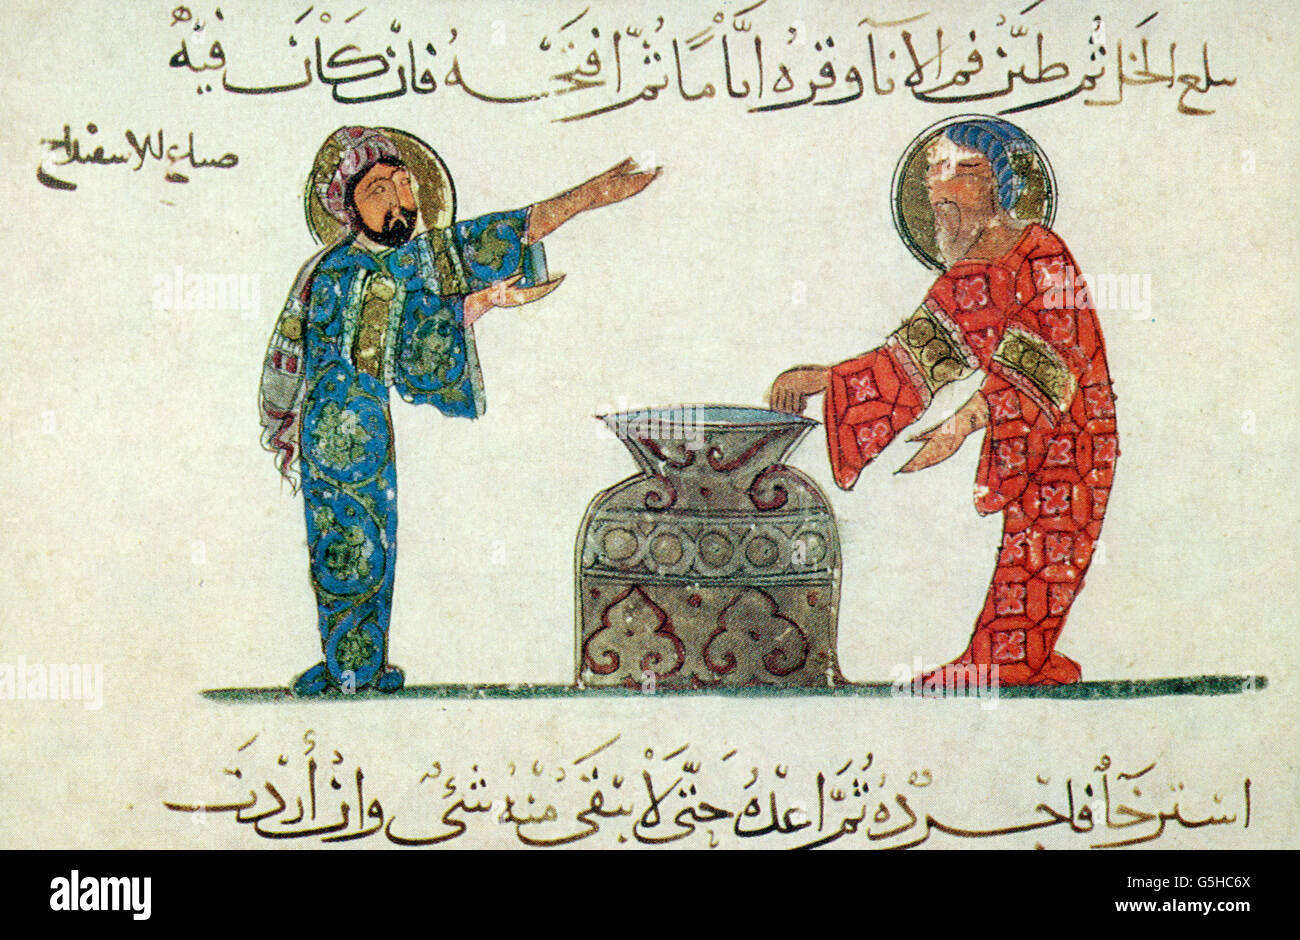 medicine,pharmacy,pharmacy,medical doctor and apothecary,miniature from an Arab manuscript,Middle Ages,medieval,mediaeval,Arabia,Arabian,Arab script,script,scripts,character,characters,graphic,graphics,occupation,occupations,medical doctor,medic,medics,apothecary,dispensing chemist,druggist,apothecaries,dispensing chemists,druggists,full length,standing,knowledge,pharmaceutics,pharmacology,doctor,doc,doctors,docs,physician,physicians,pharmacist,pharmacists,vessel,vessels,container,containers,medicine,medicines,phar,Additional-Rights-Clearences-Not Available Stock Photo